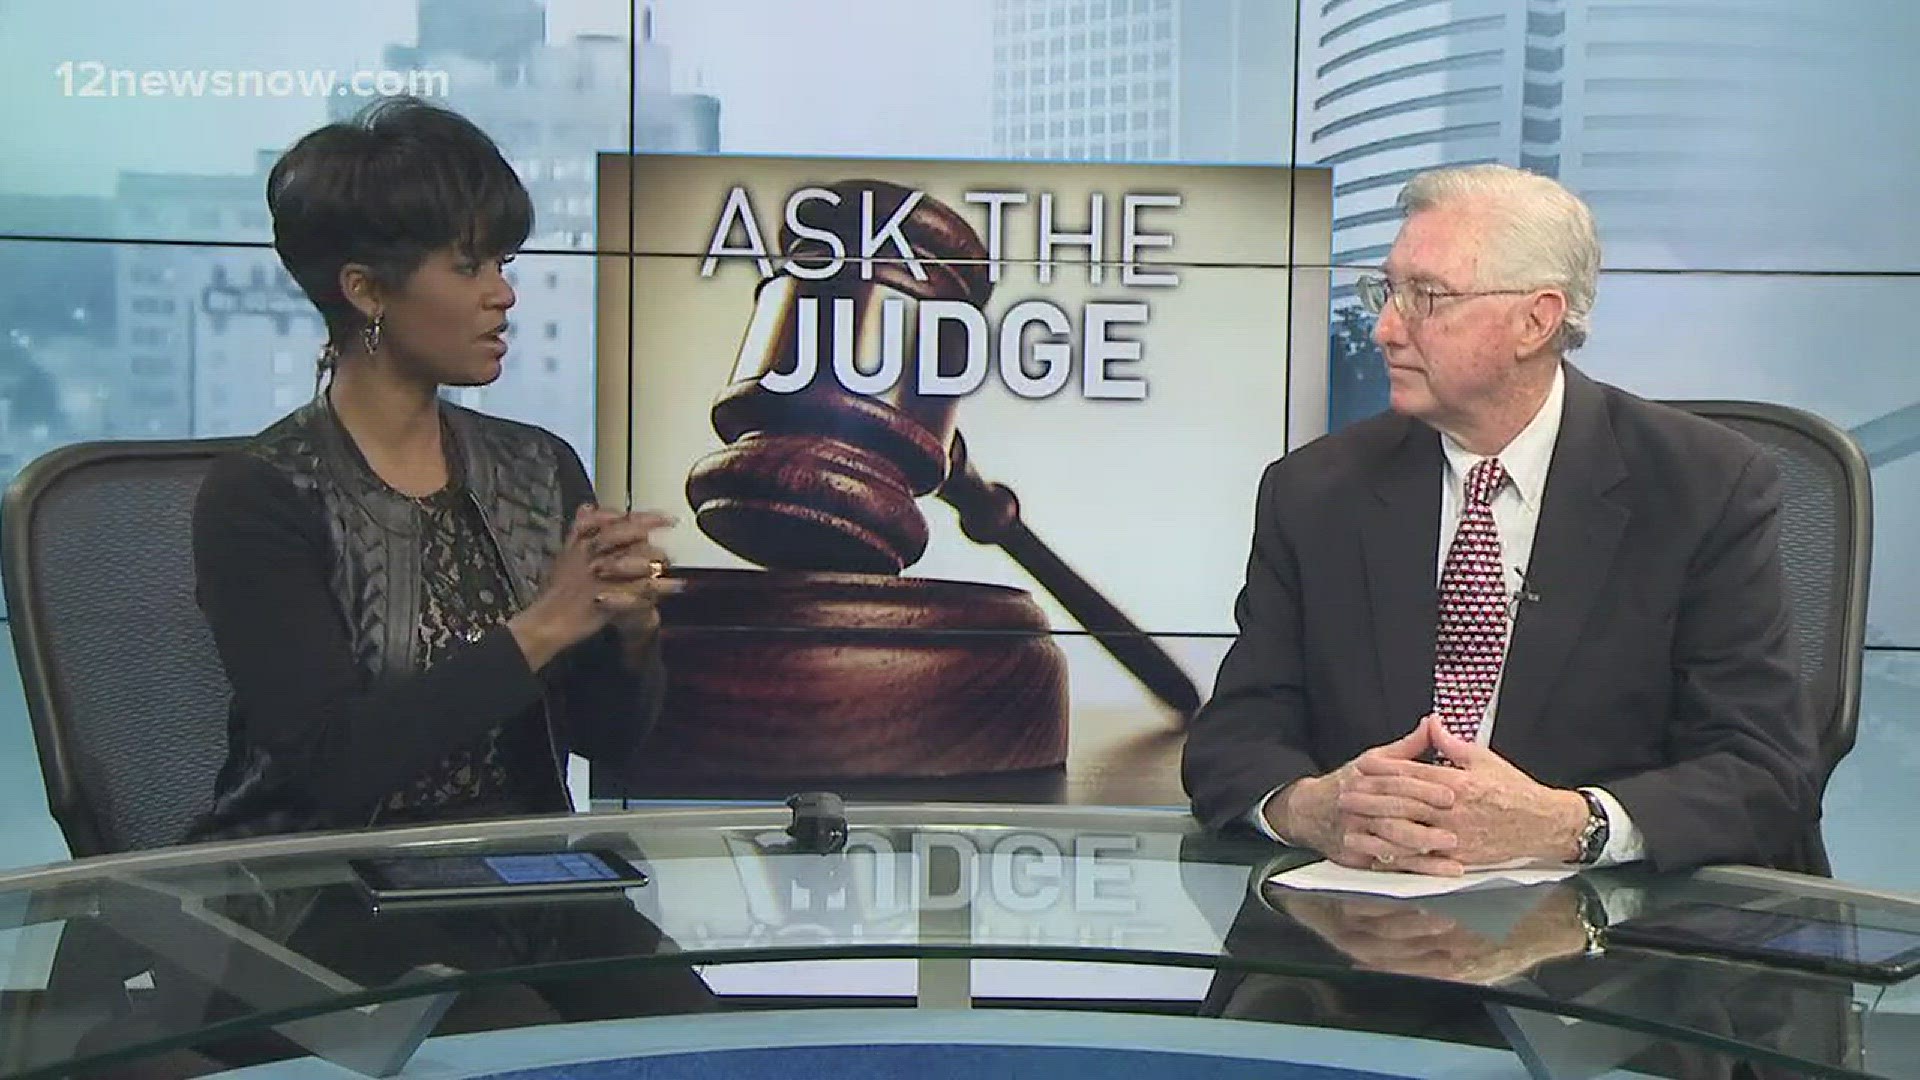 We answer your legal questions Wednesdays on 12News at 5. Submit your questions at 12NewsNow.com/AskTheJudge